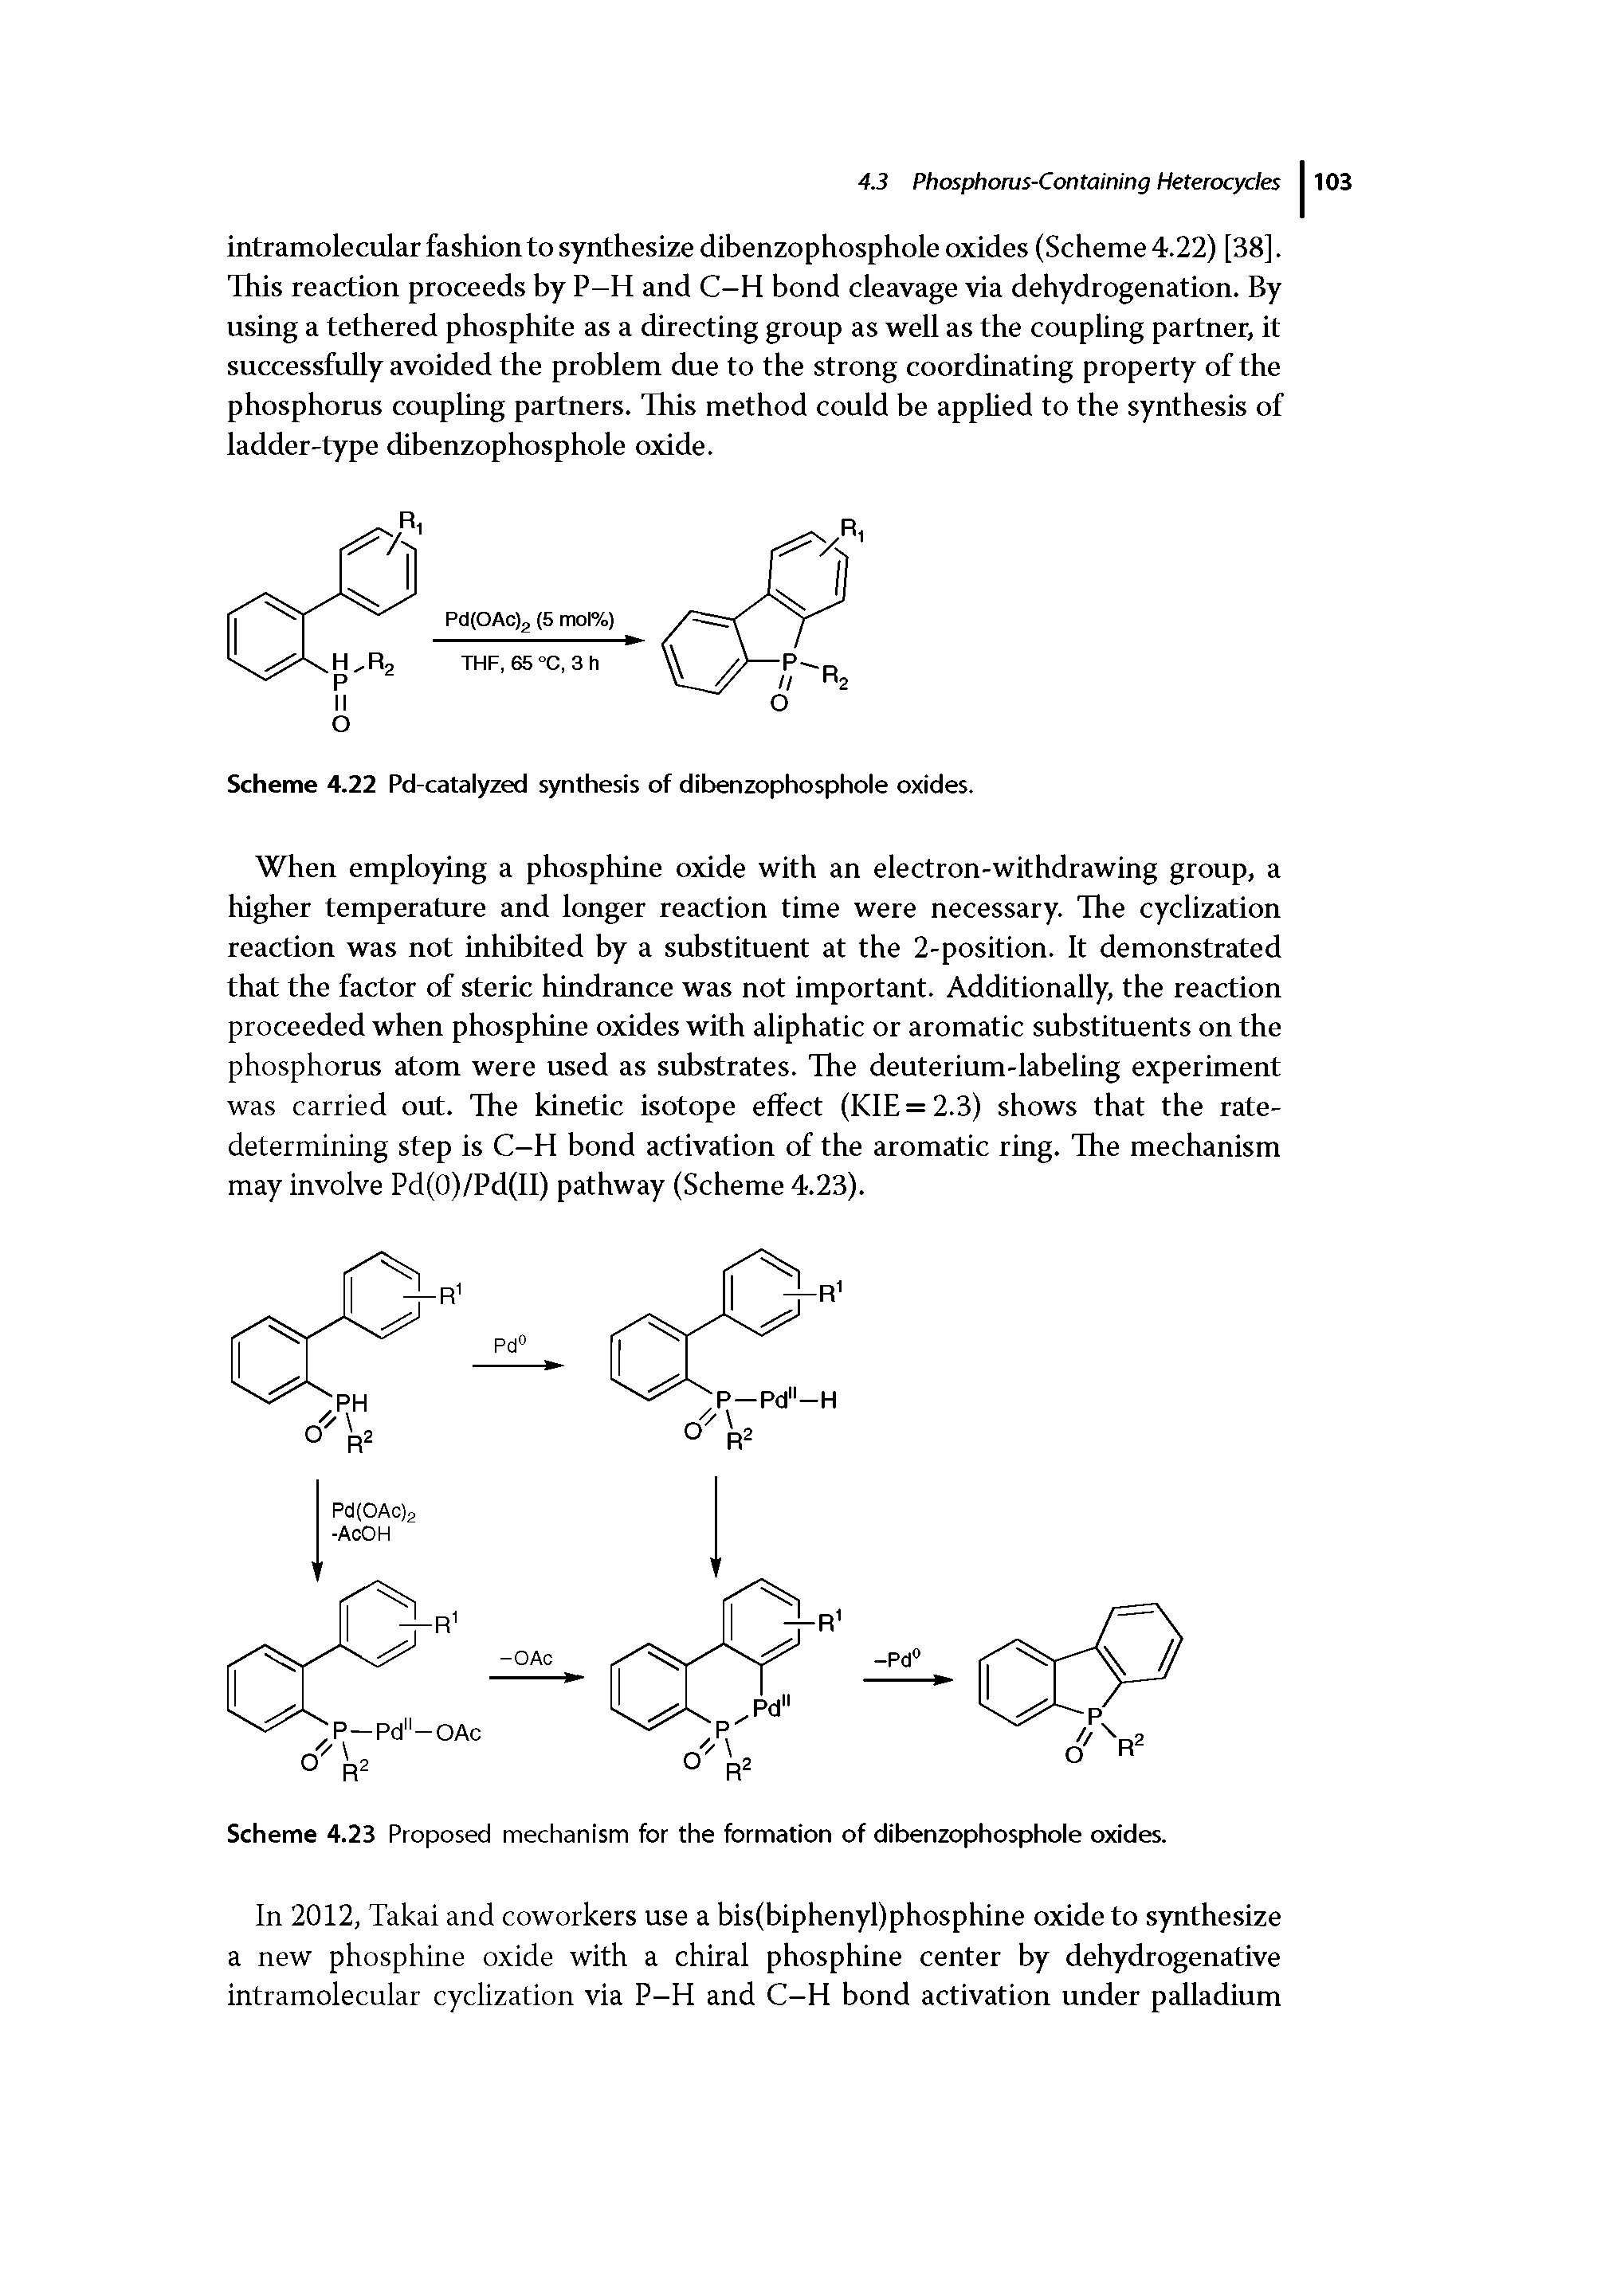 Scheme 4.23 Proposed mechanism for the formation of dibenzophosphole oxides.